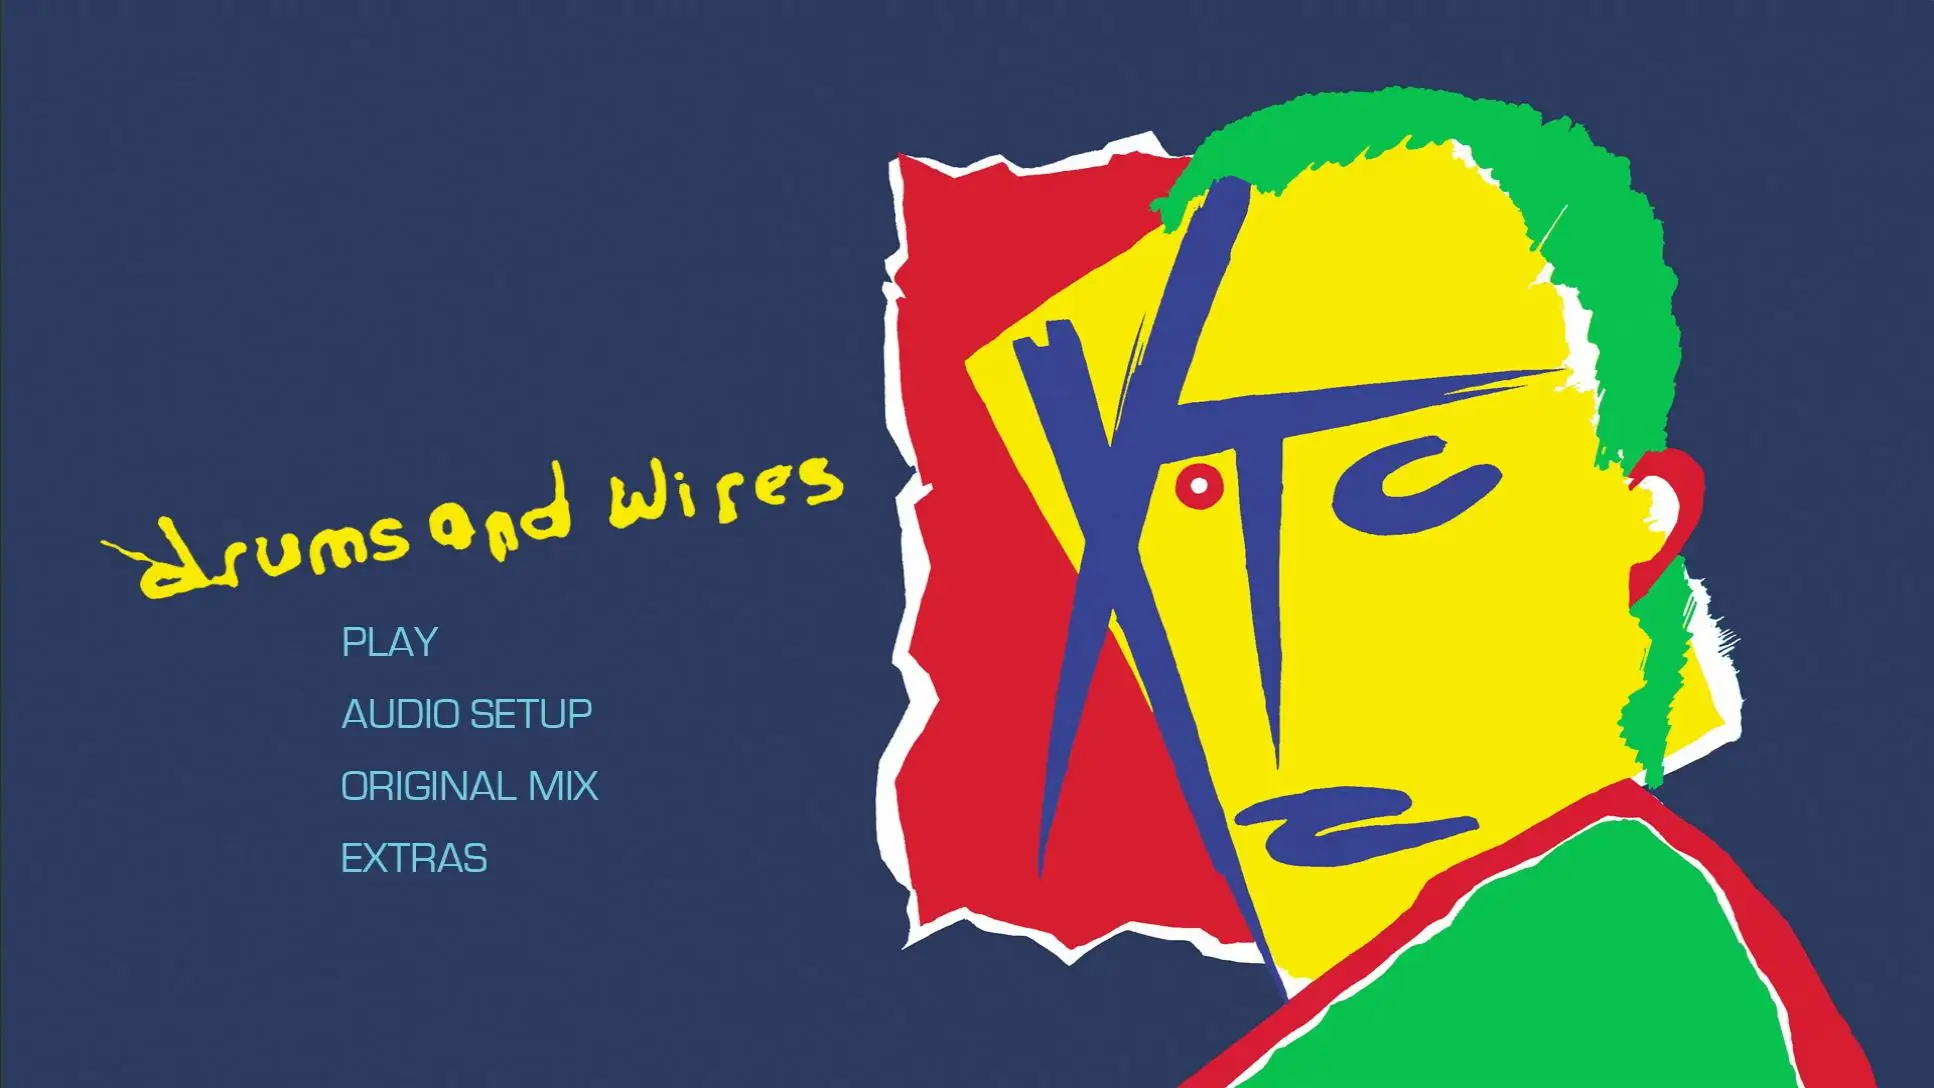 Ex load. Xtc Drums and wires 1979. Xtc Drums and wires. Xtc - Drums and wires 1979 Cover. Xtc Drums and wires 1979 купить в Москве.